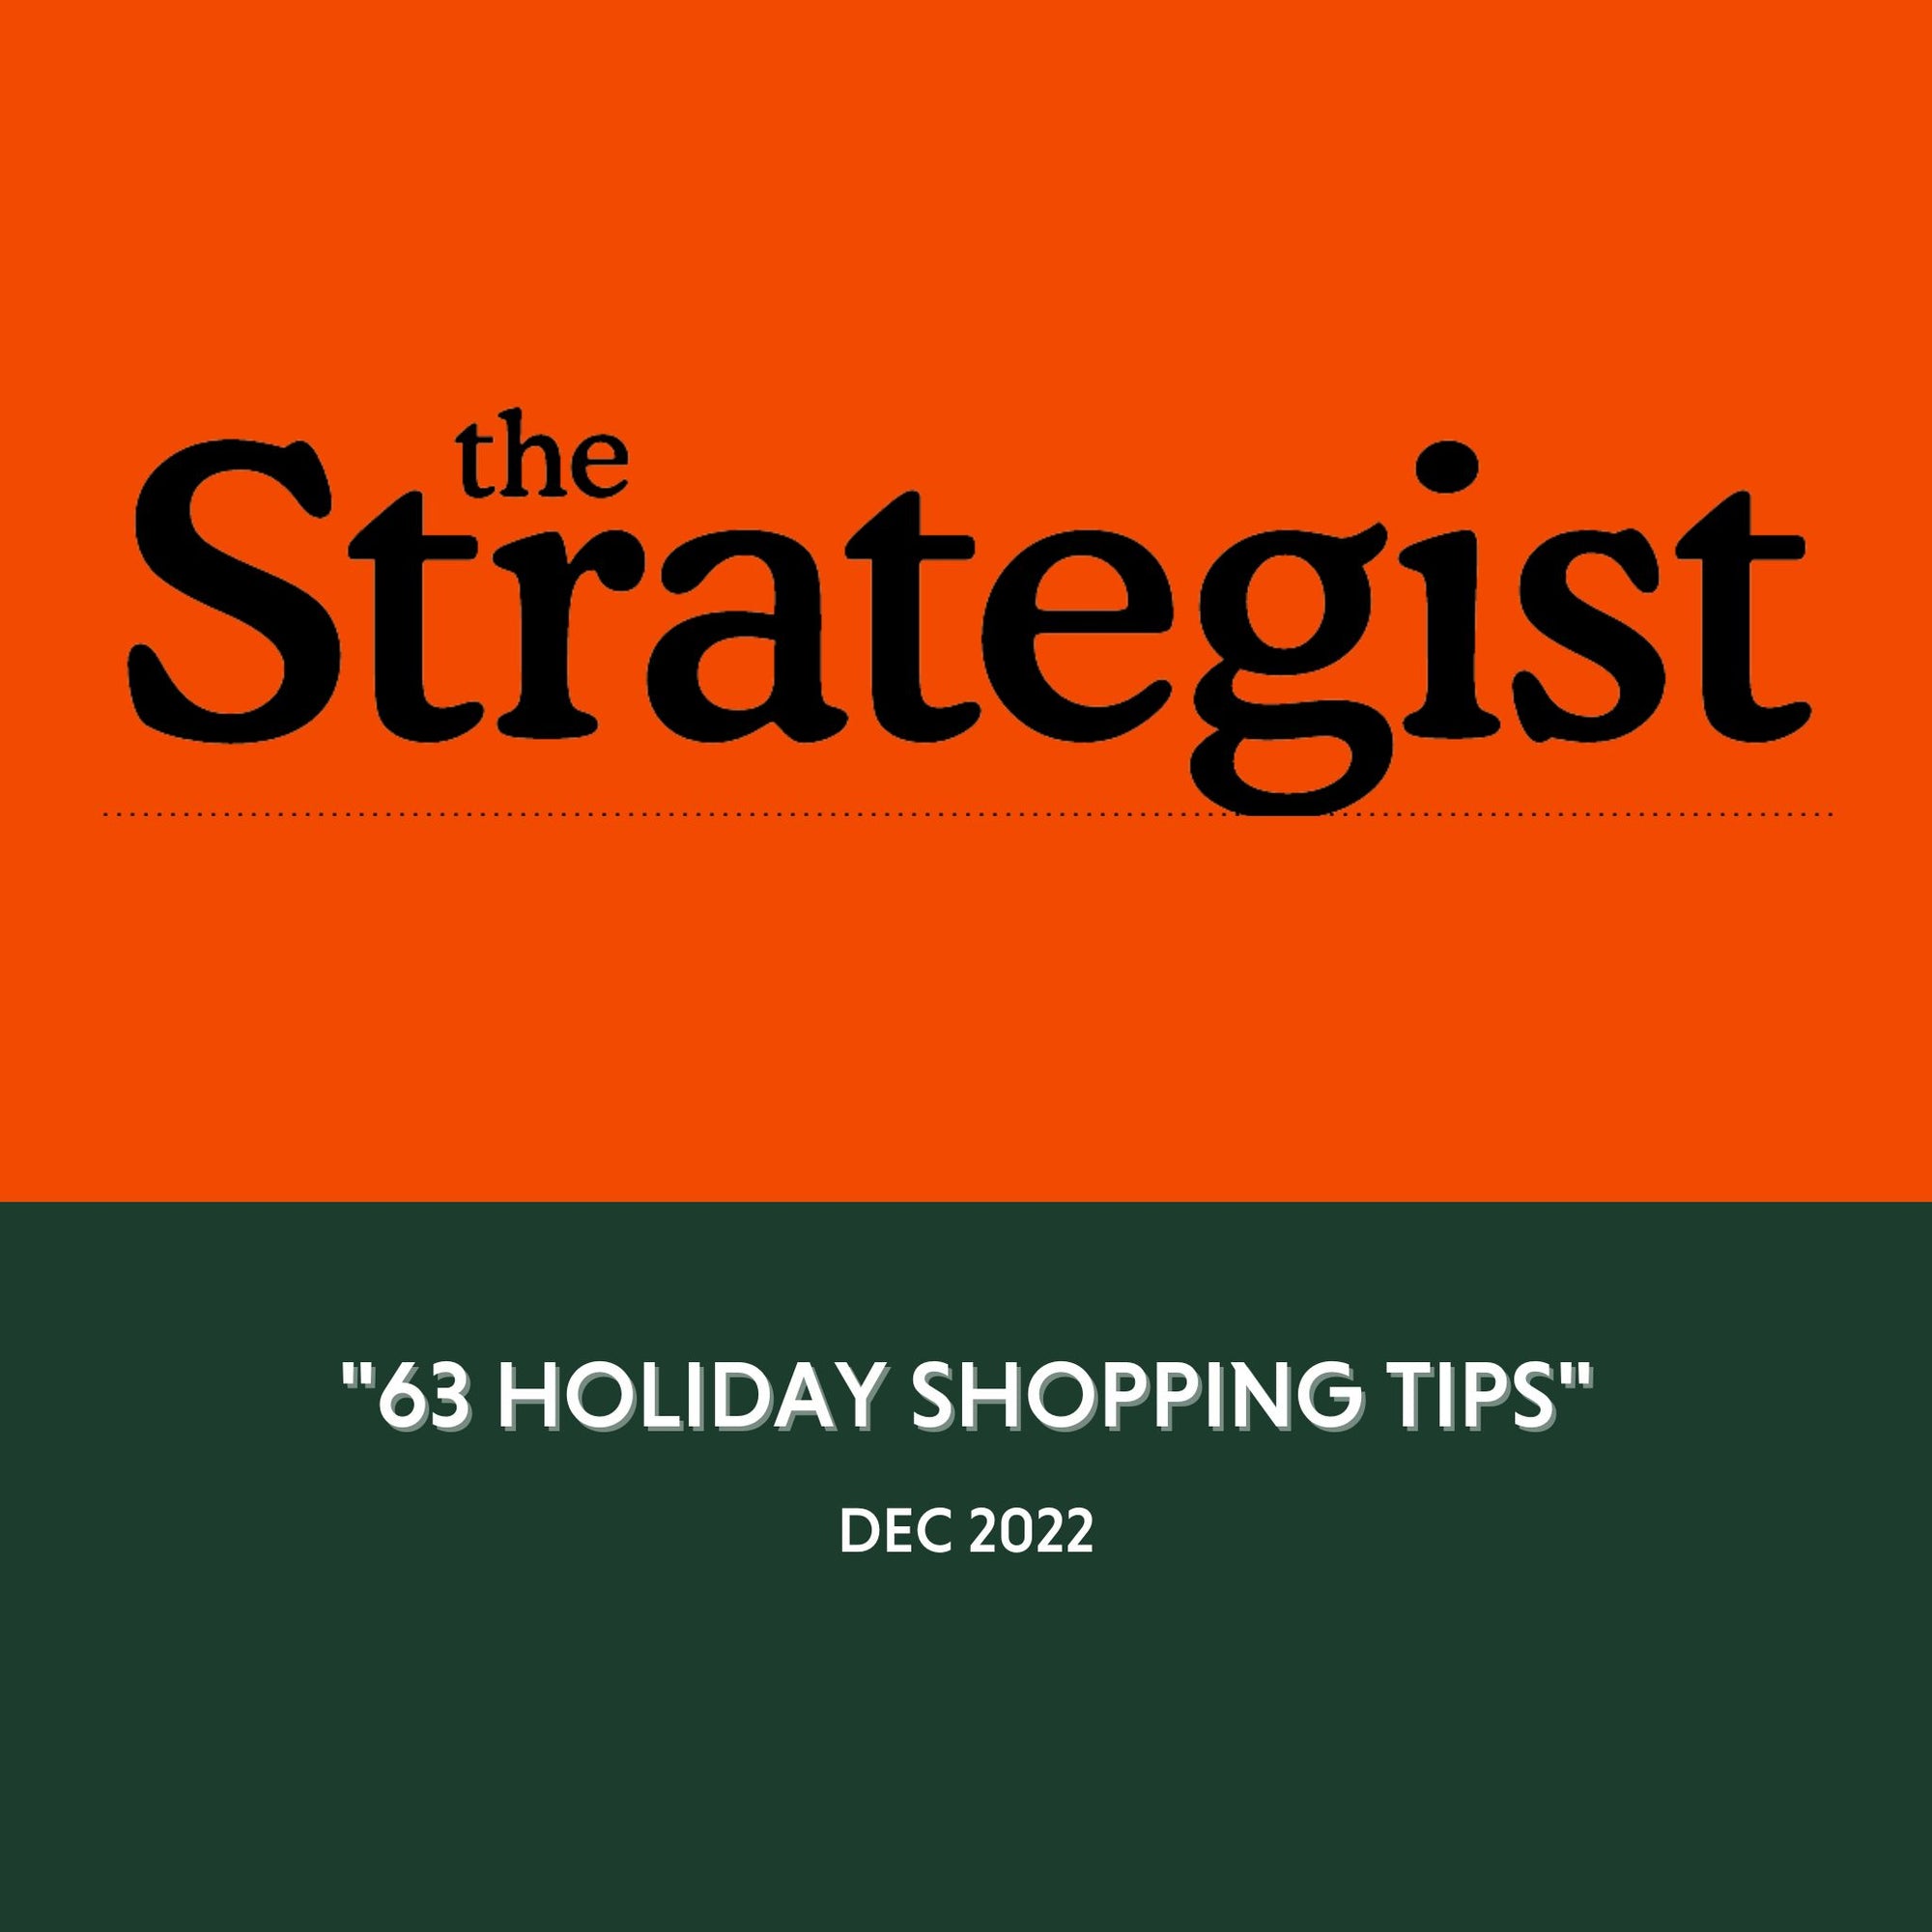 The Strategist - "63 Holiday Shopping Tips" - Dec 2022